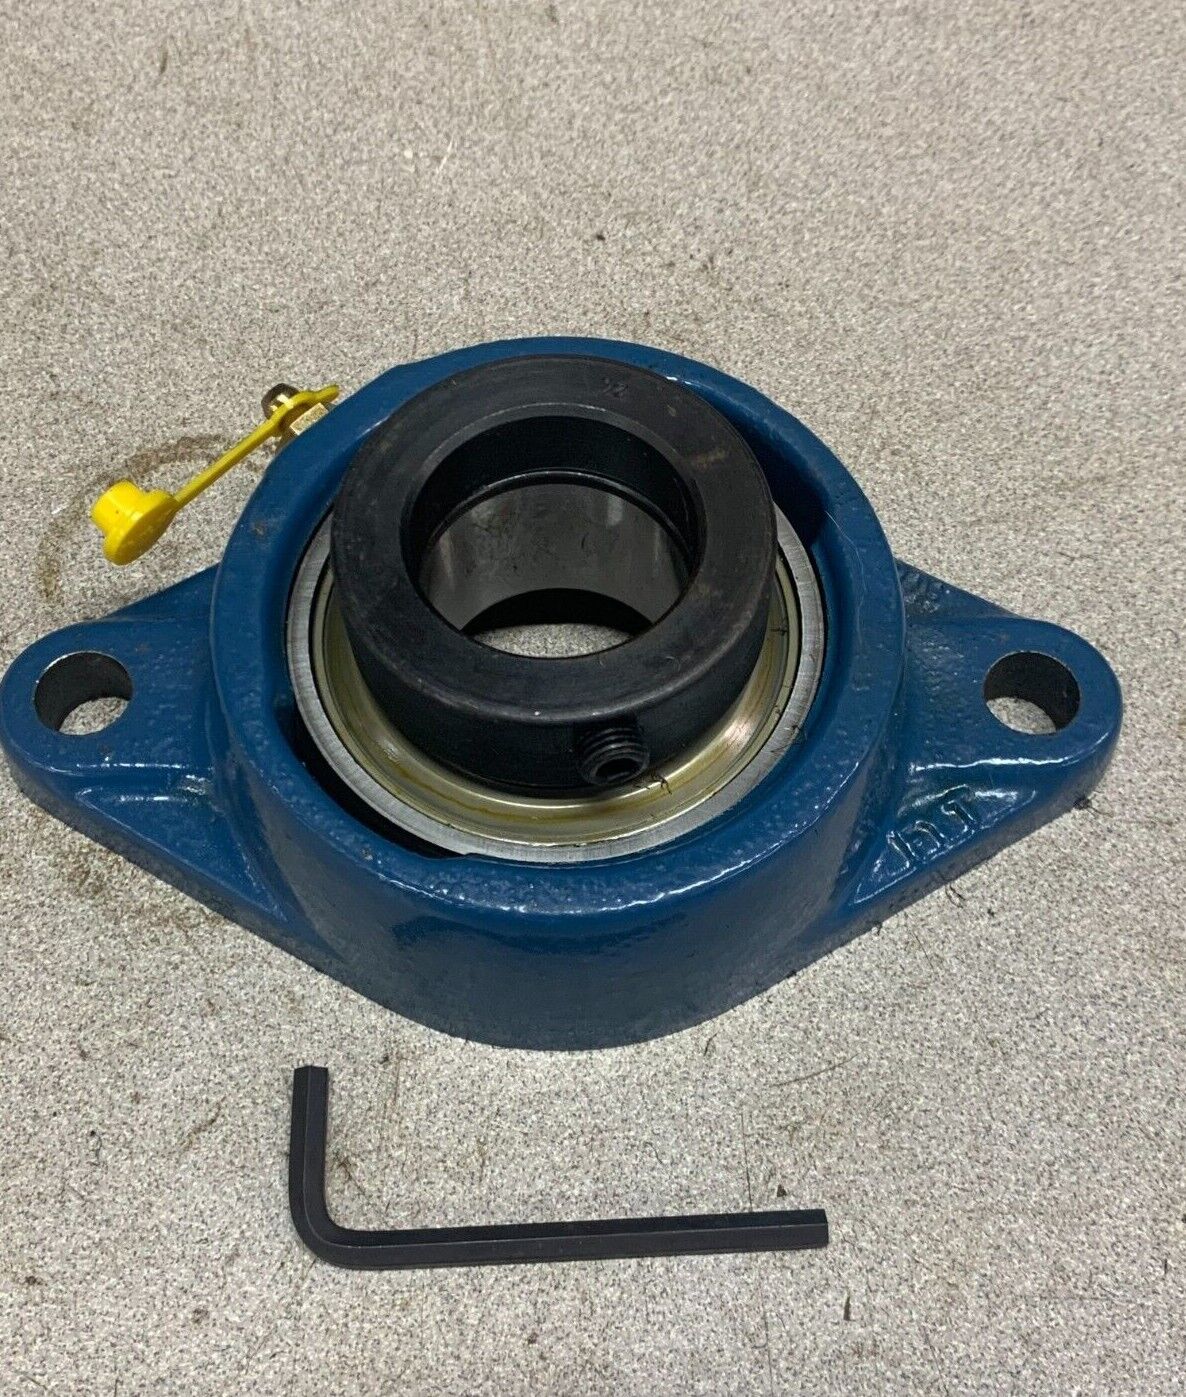 NEW NO BOX SKF 2-BOLT FLANGE BEARING FYT 508 WITH YET 208-108 INSERT 1-1/2" BORE